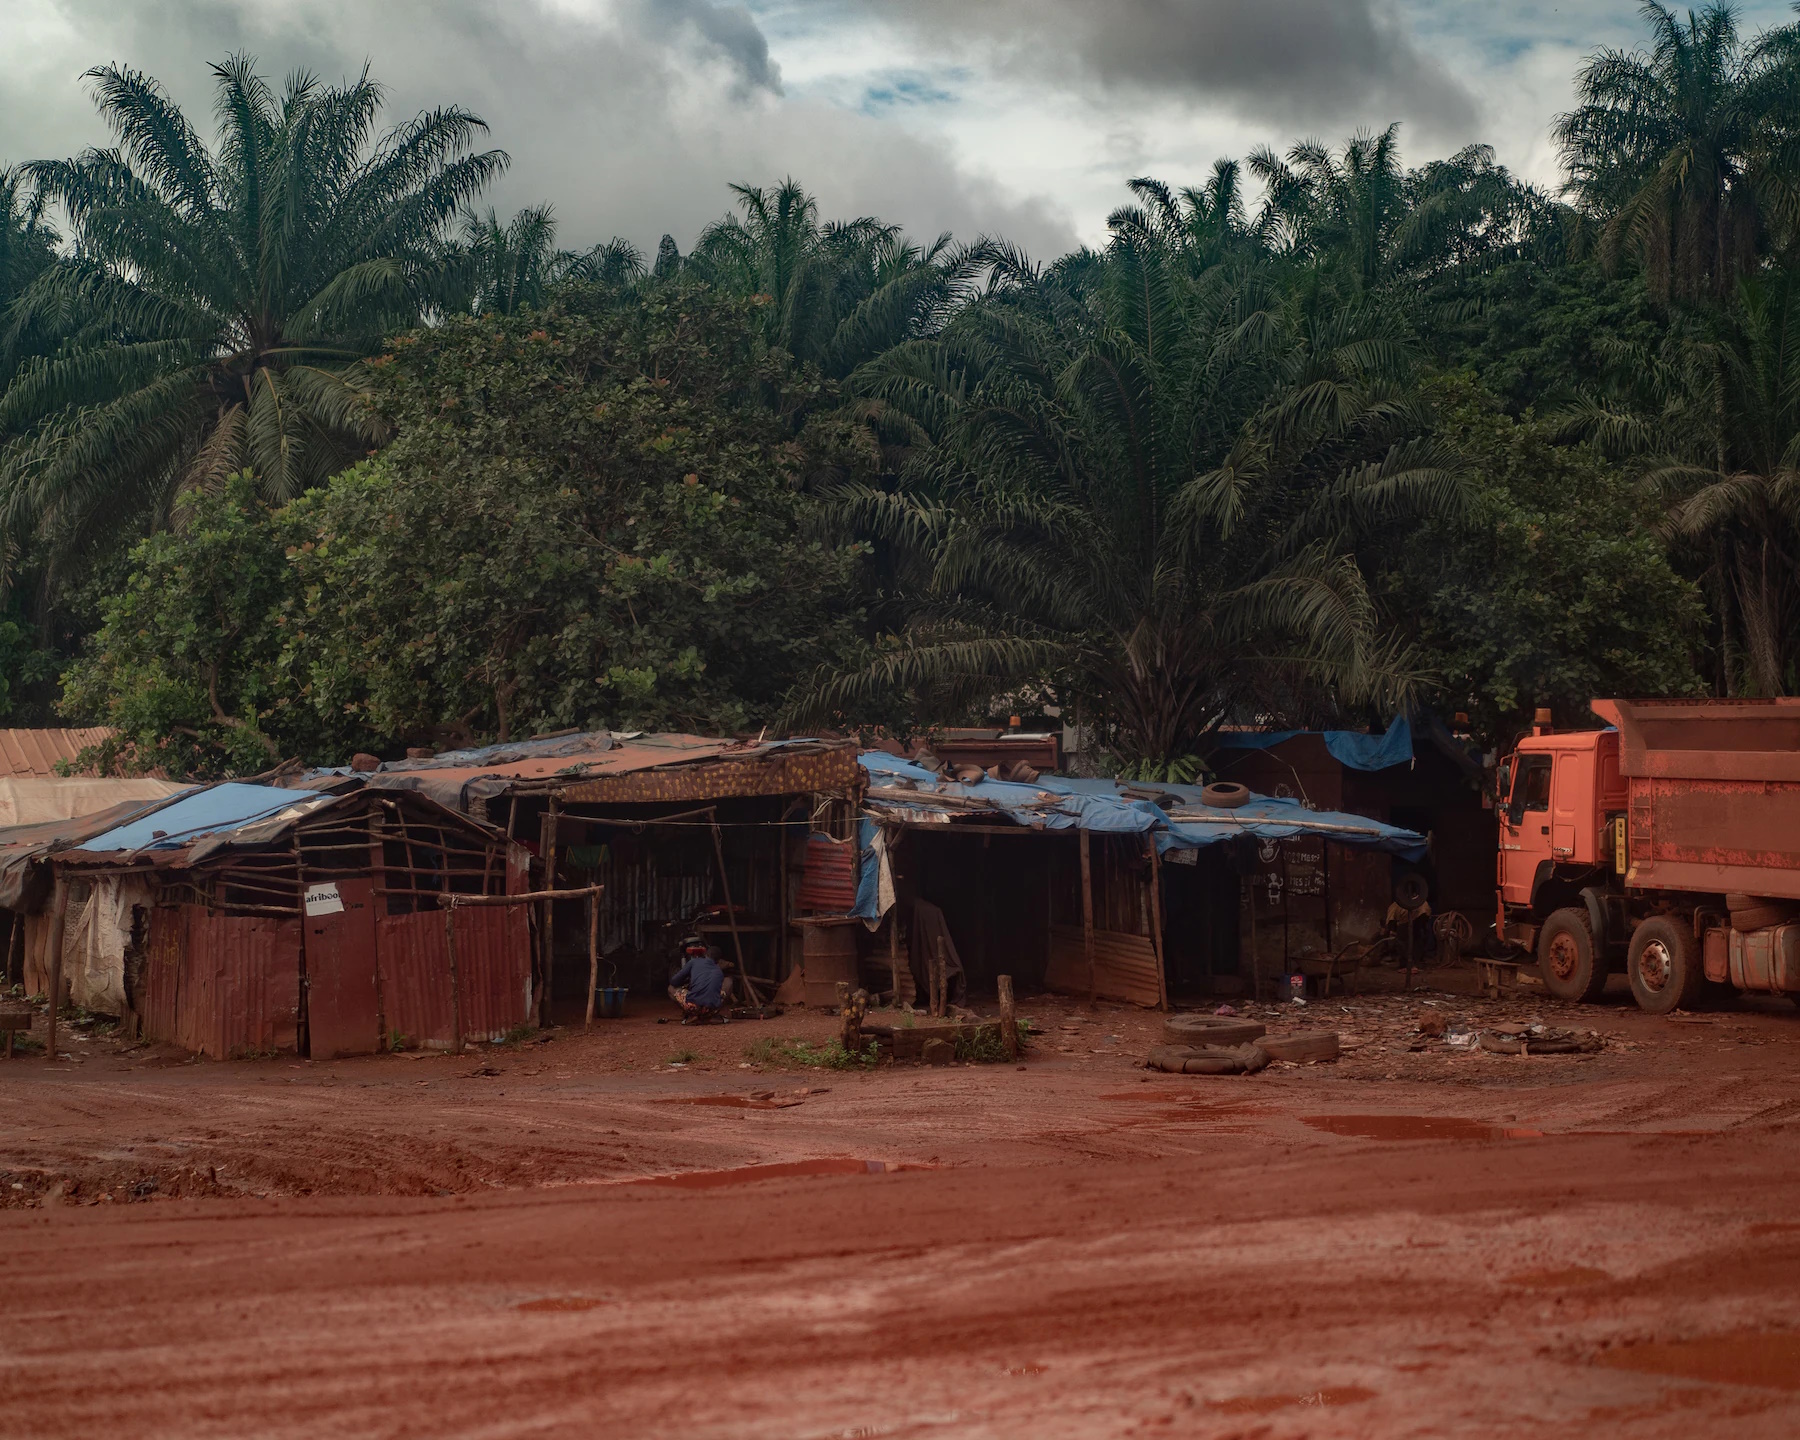 A village along a mining road that cuts through Boké, Guinea, facilitating the transport of tons of bauxite every day. Palm trees along a mining road are coated with red dust kicked up by trucks transporting bauxite. The dust prevents palm trees in plantations from growing properly, affecting villagers’ harvests. Photo: Chloe Sharrock / MYOP / The Washington Post